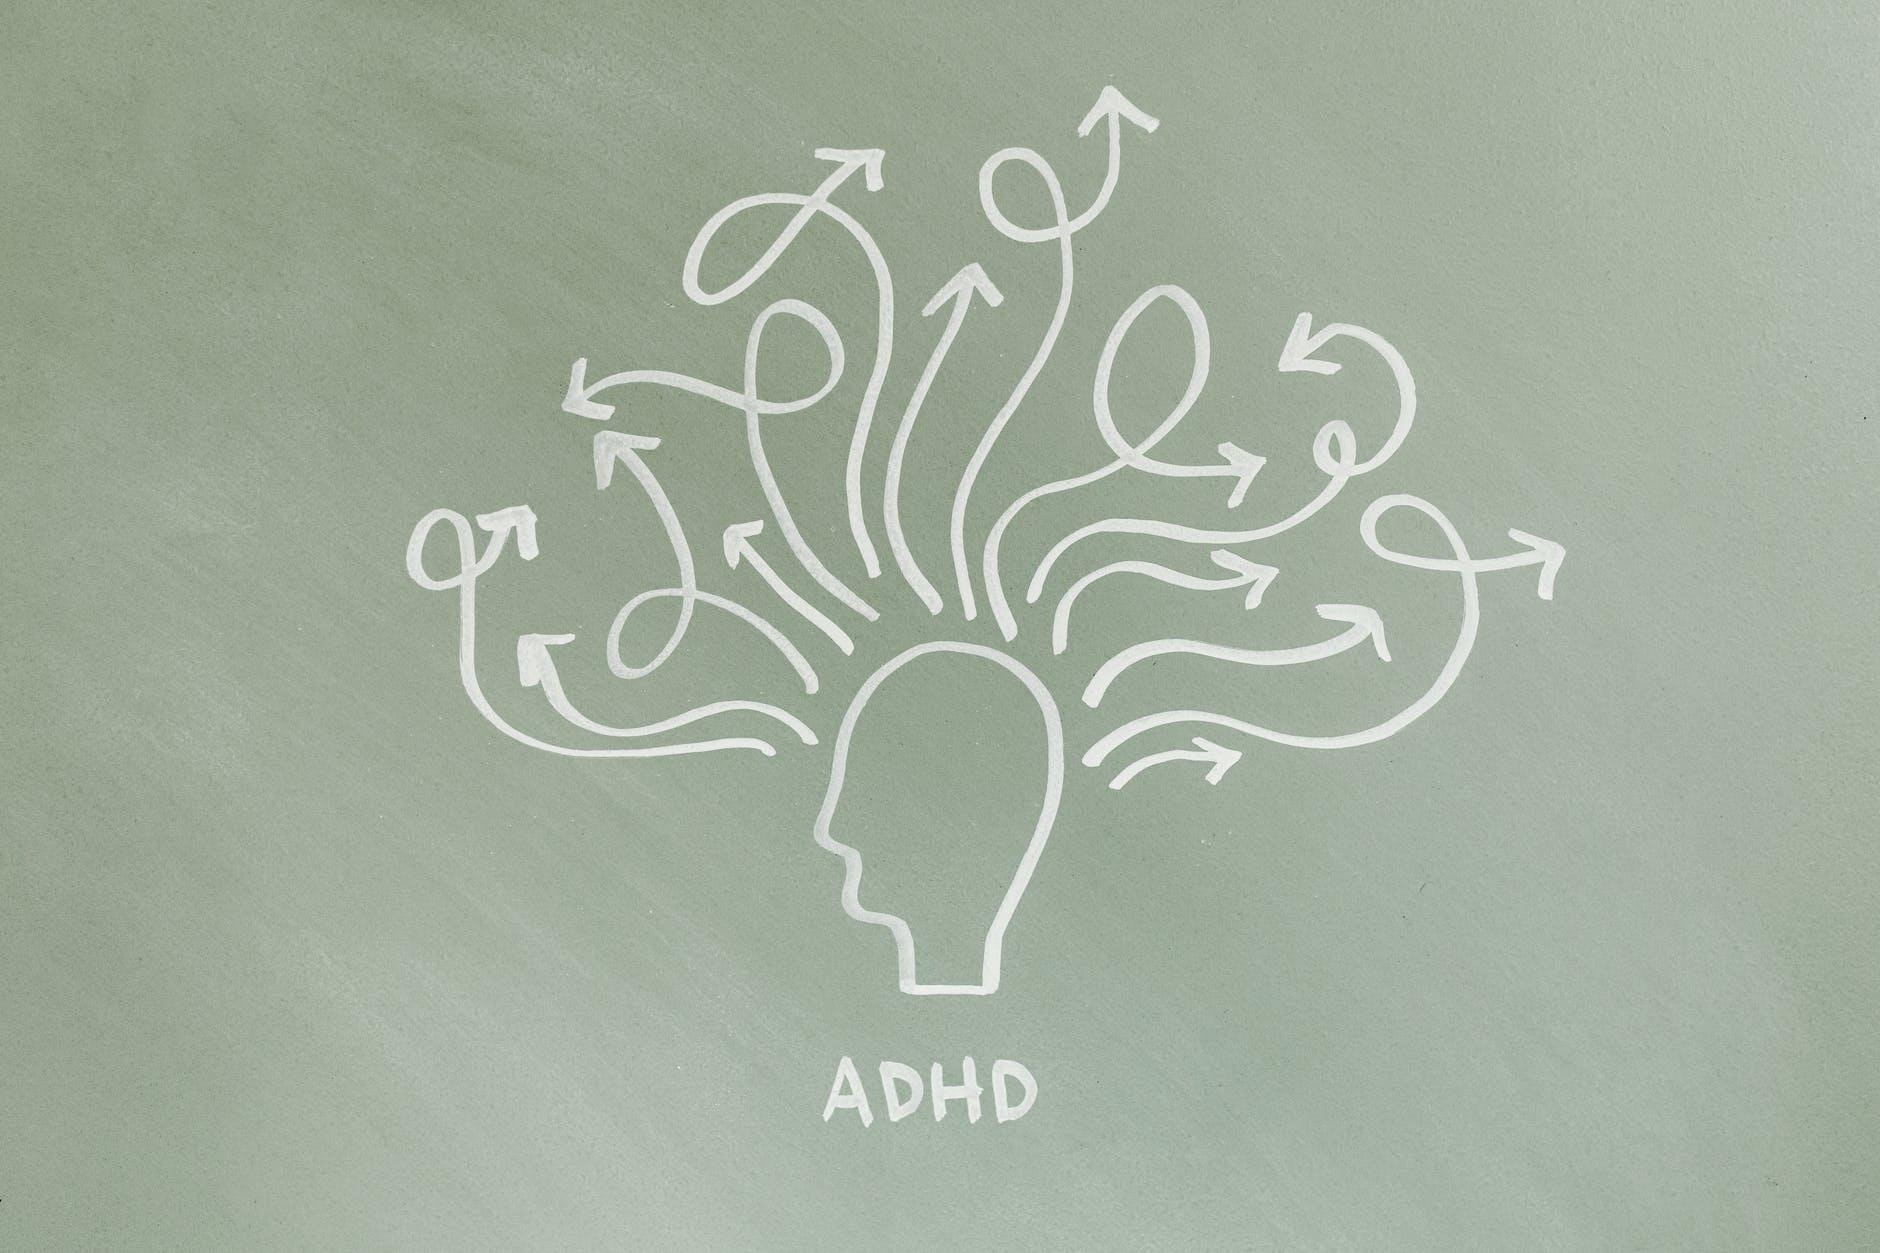 How to know if you have ADHD?